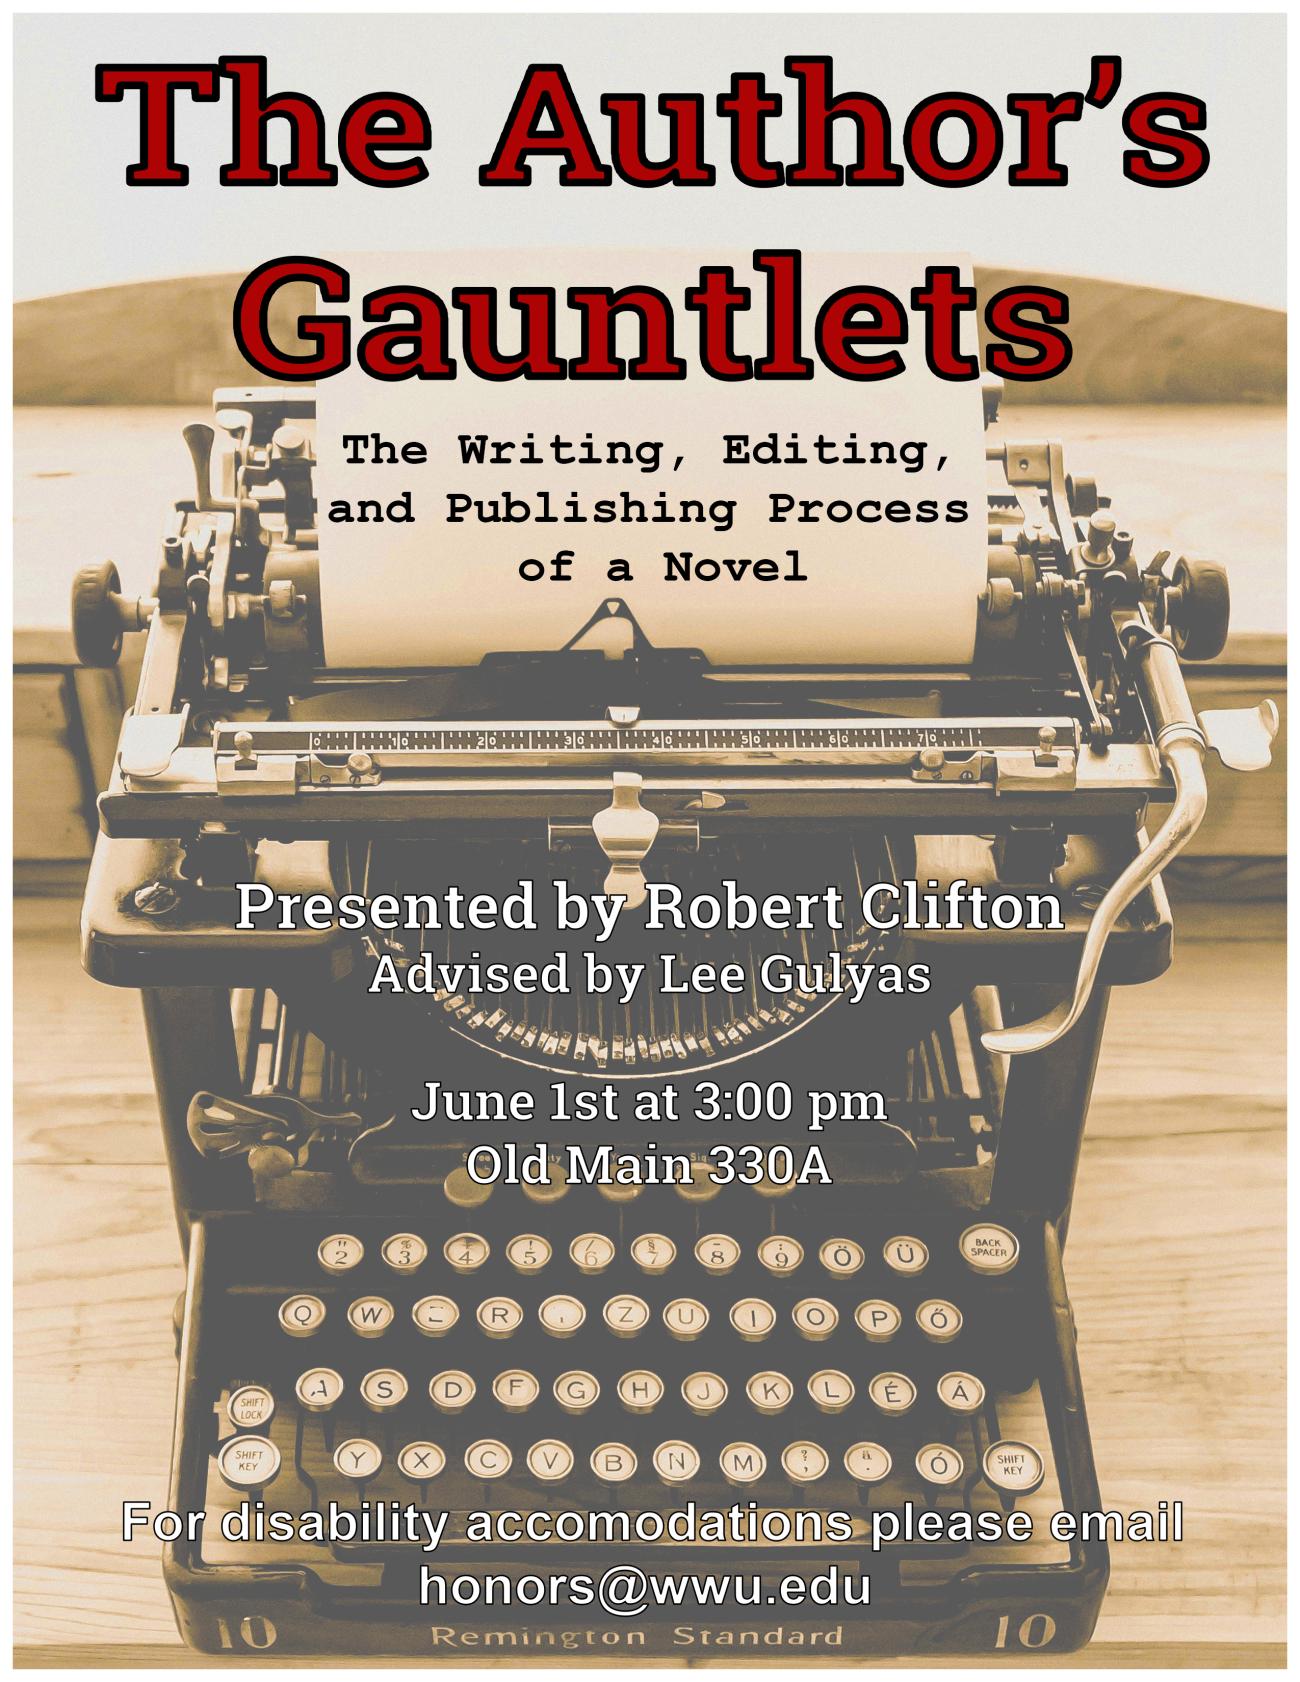 A poster with a typewriter in the background. The text reads: "The Author's Gauntlets: The Writing, Editing, and Publishing Process of a Novel. Presented by Robert Clifton, Advised by Lee Gulyas. June 1st at 3:00 pm Old Main 330A. For disability accommodations, please email honors@wwu.edu."